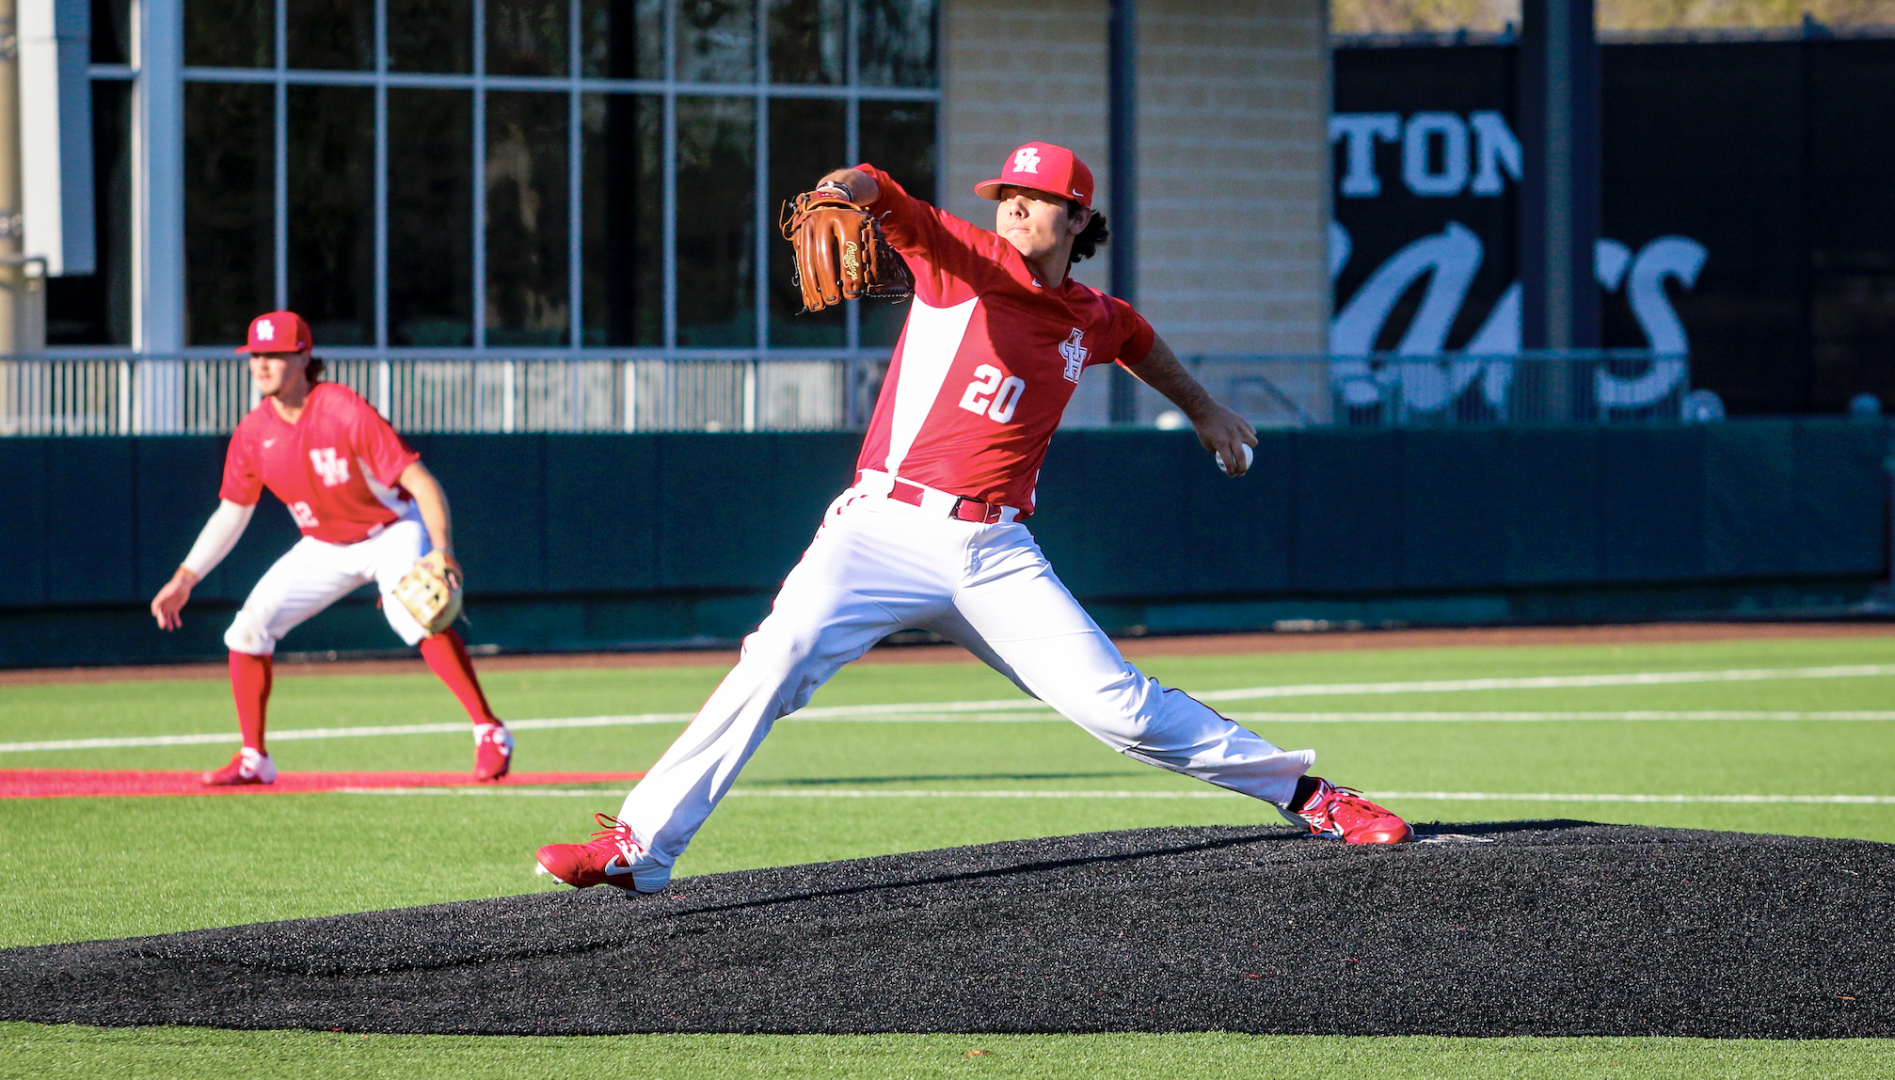 Starting pitcher Clay Aguilar gave up two earned runs in 5.1 innings pitched in Houston's 8-4 loss to Tennessee at the Round Rock Classic on Saturday in Round Rock. | Courtesy of UH athletics